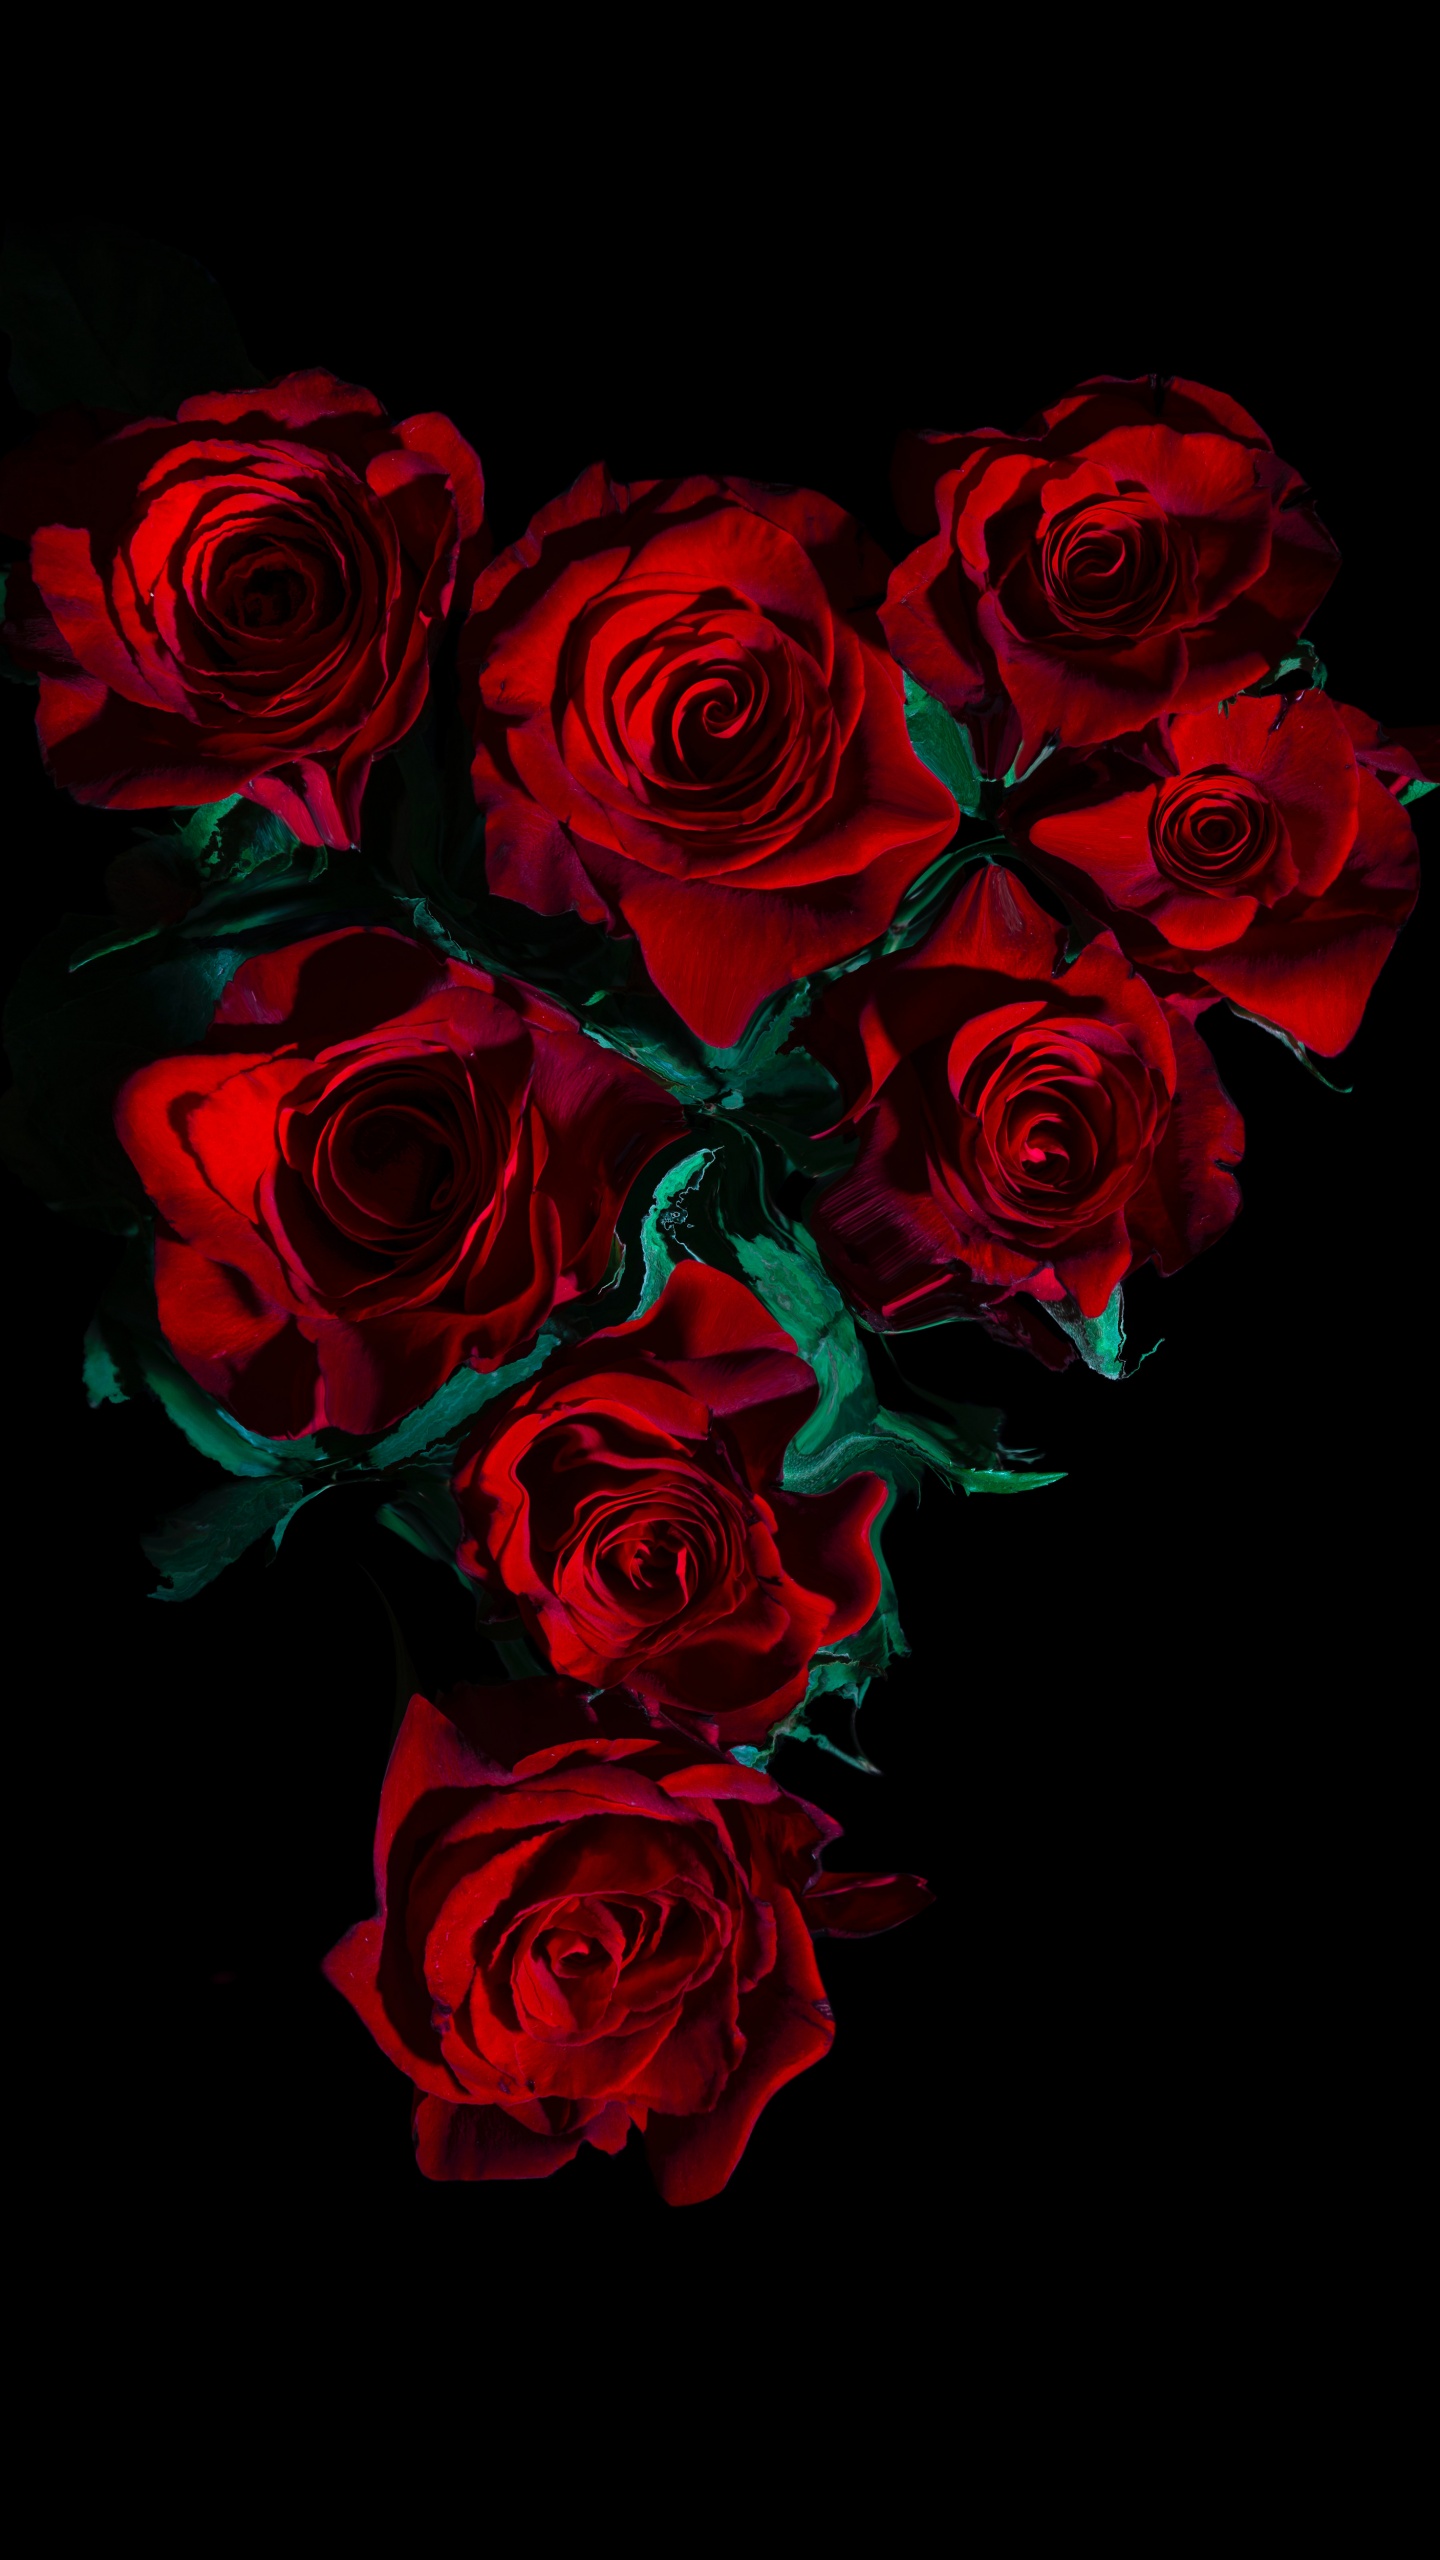 4K Rose Wallpaper HD:Amazon.co.uk:Appstore for Android